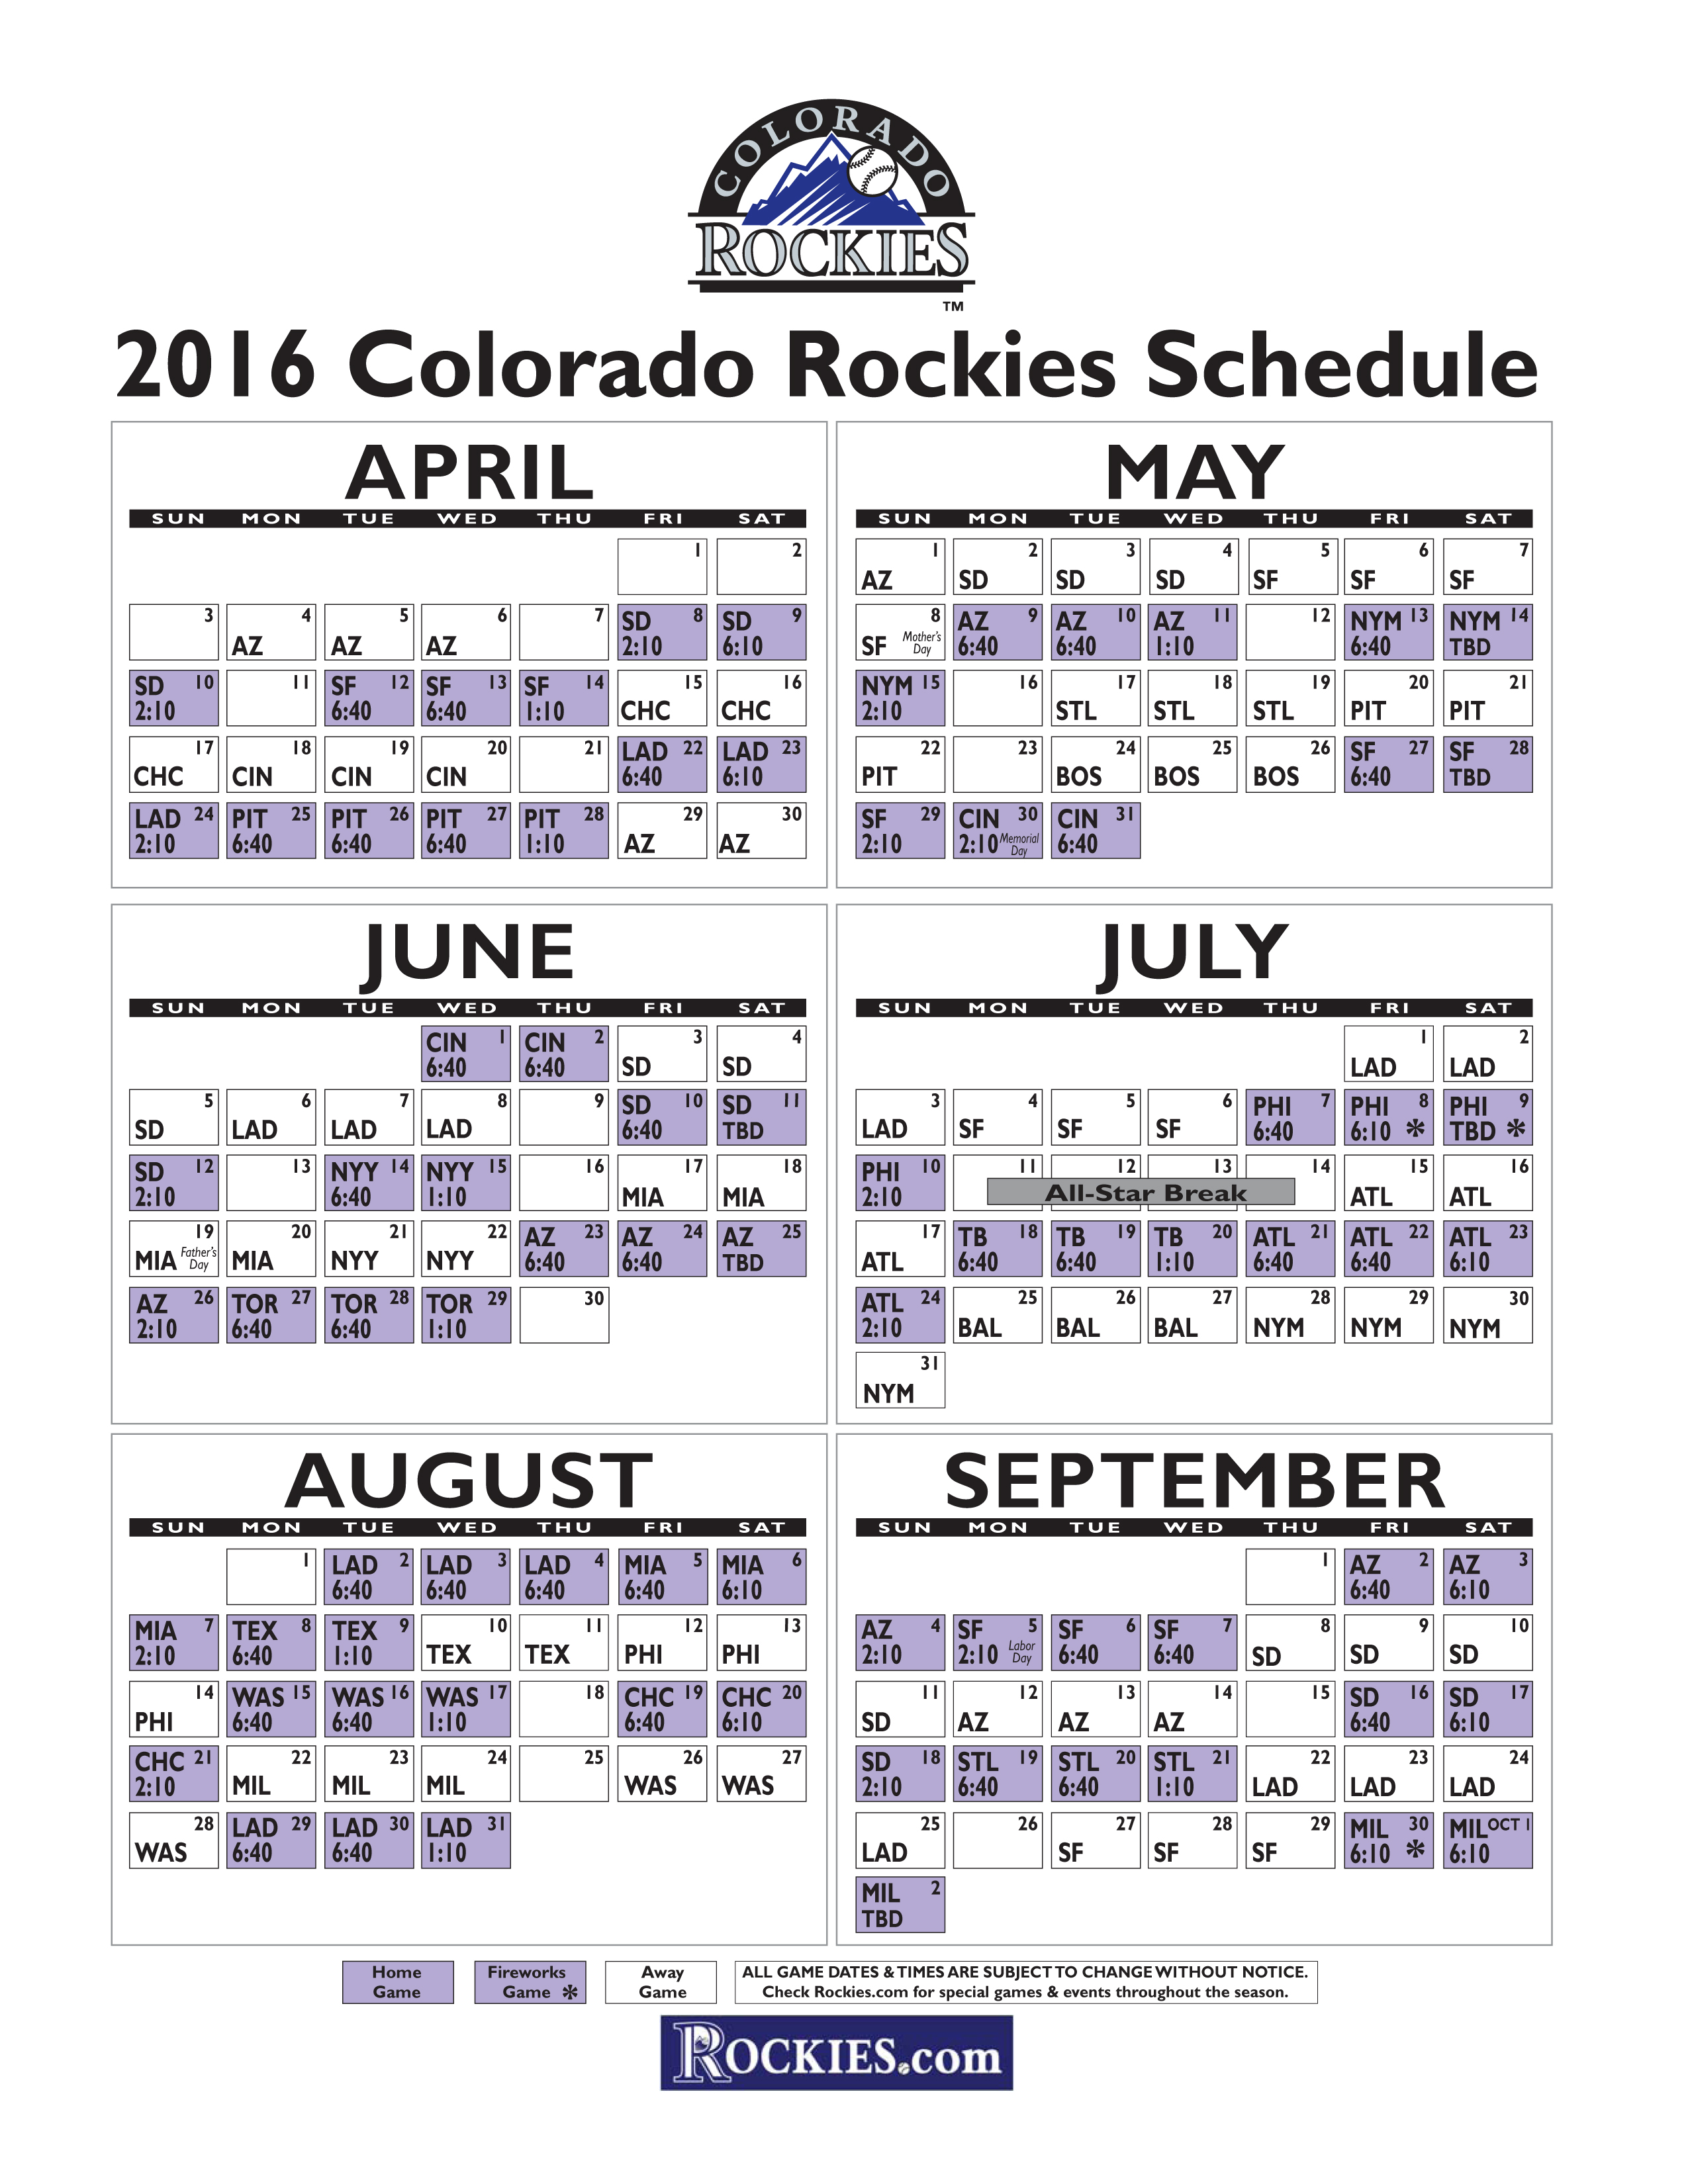 Colorado Rockies 2016 Schedule Announced I70 Scout & Eastern